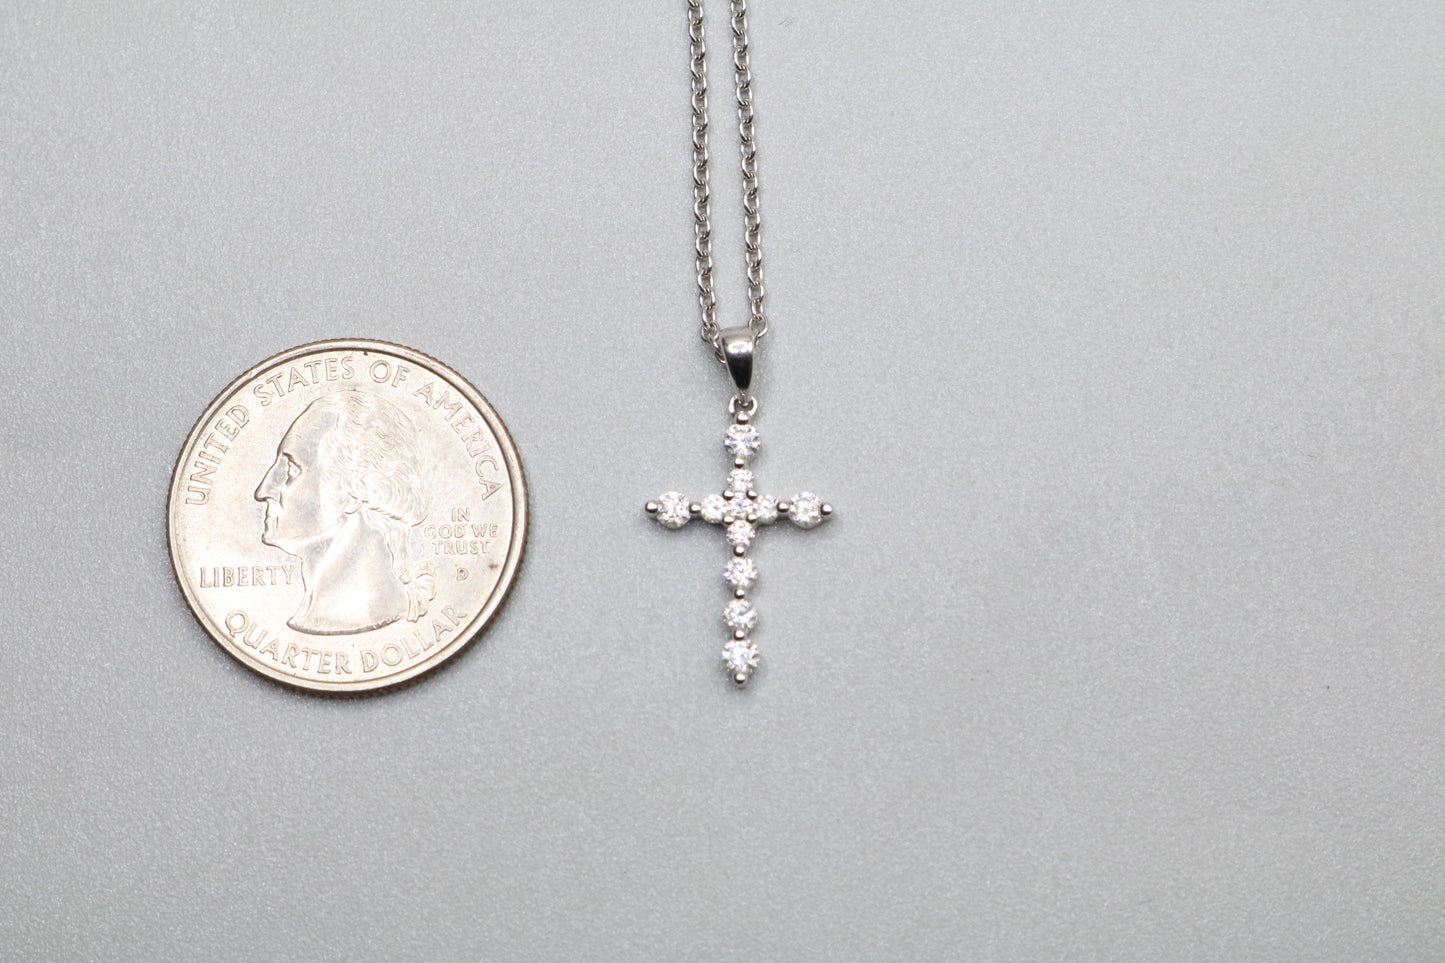 14k White Gold Diamond Cross Charm w/ 14k White Gold Cable Style Chain Necklace